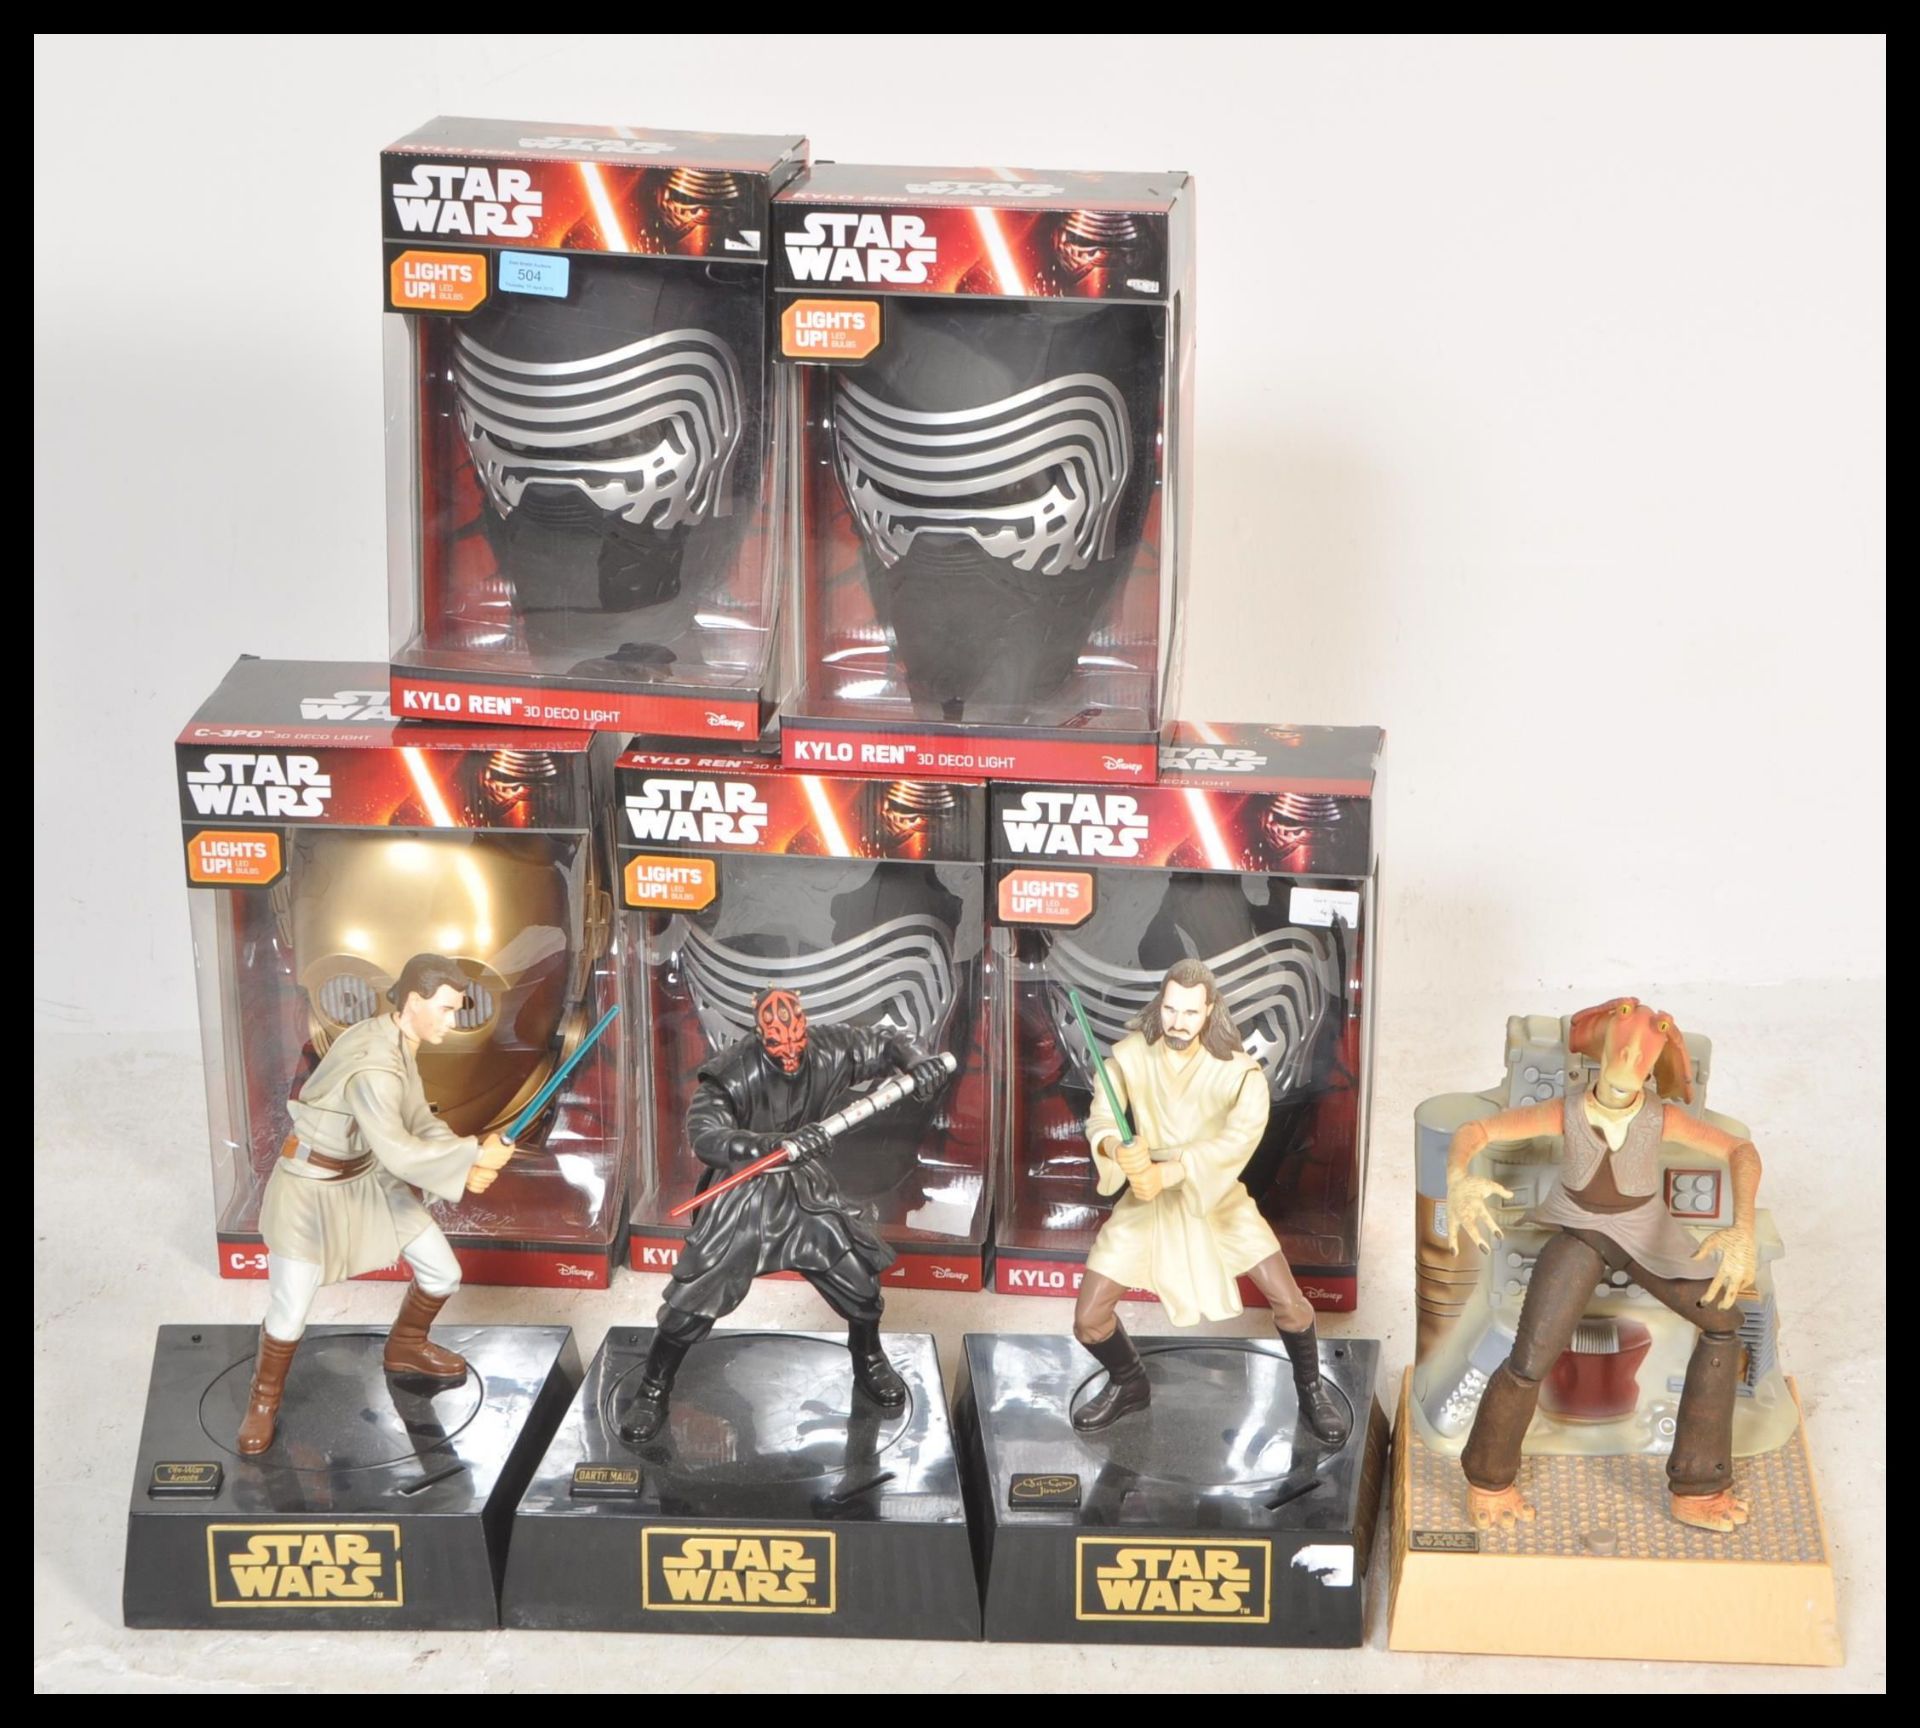 COLLECTION OF STAR WARS TOYS AND MERCHANDISE.